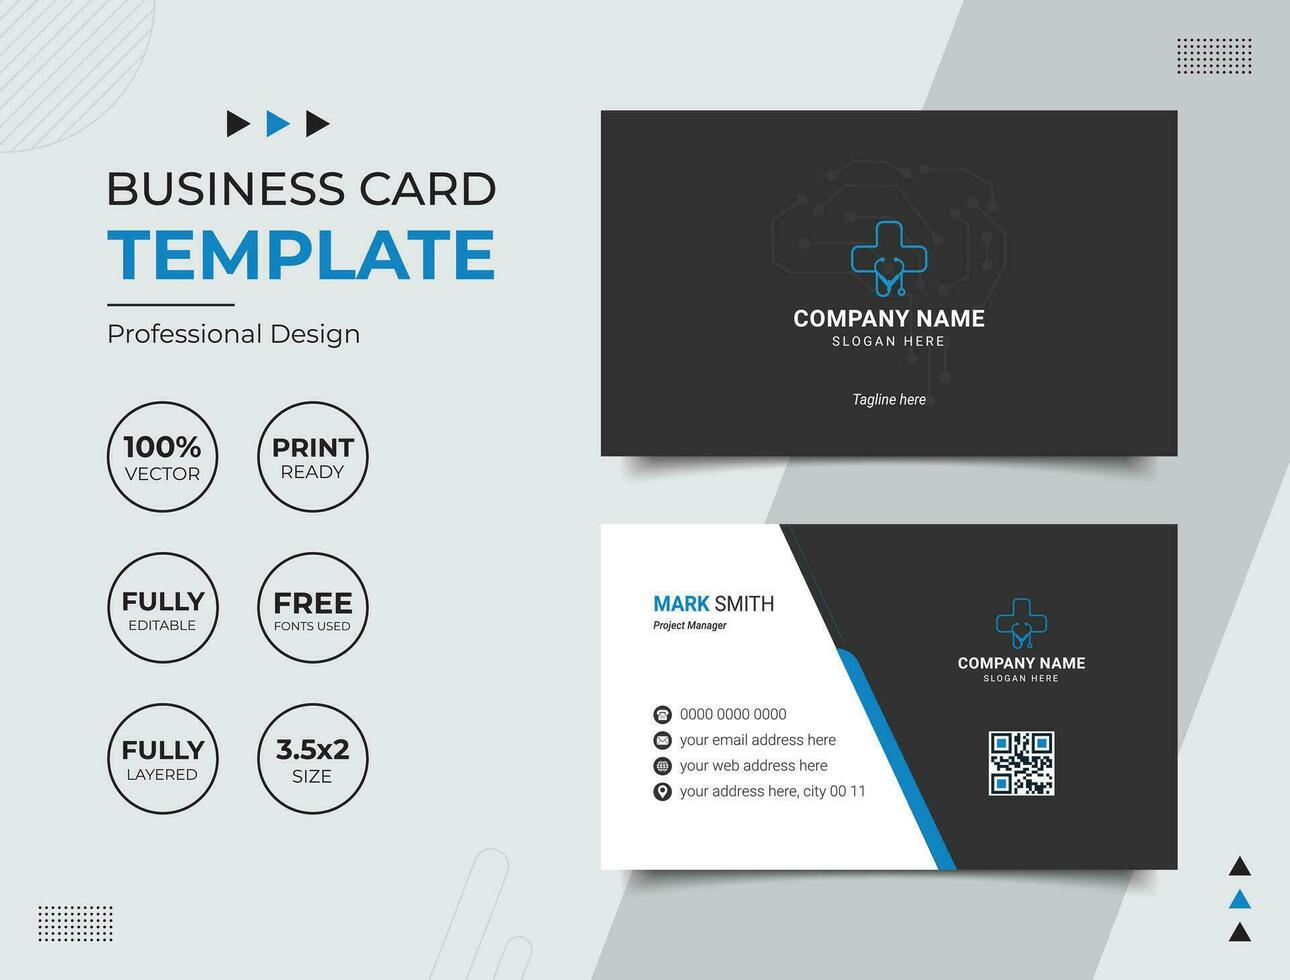 Professional Medical Doctor Healthcare Business Card Design Template vector